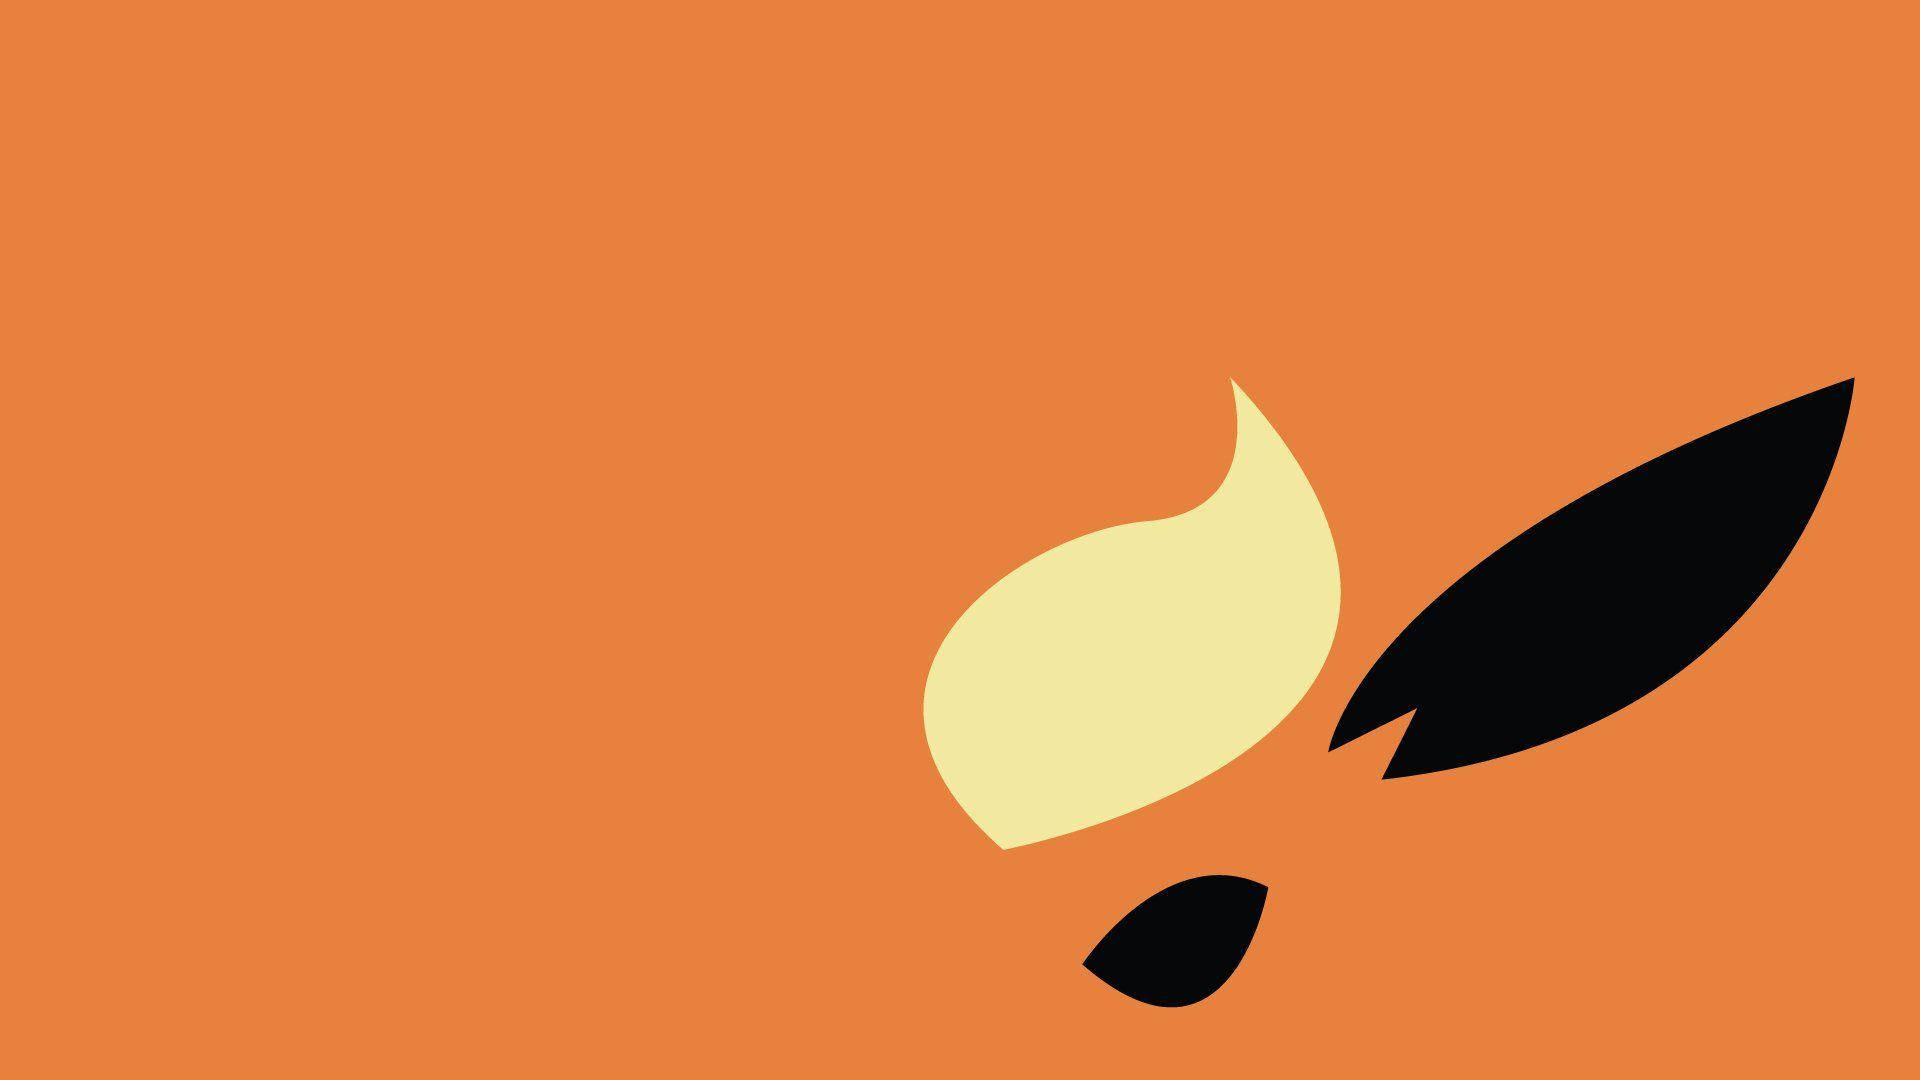 Flareon Partial Face On Orange Background Wallpaper